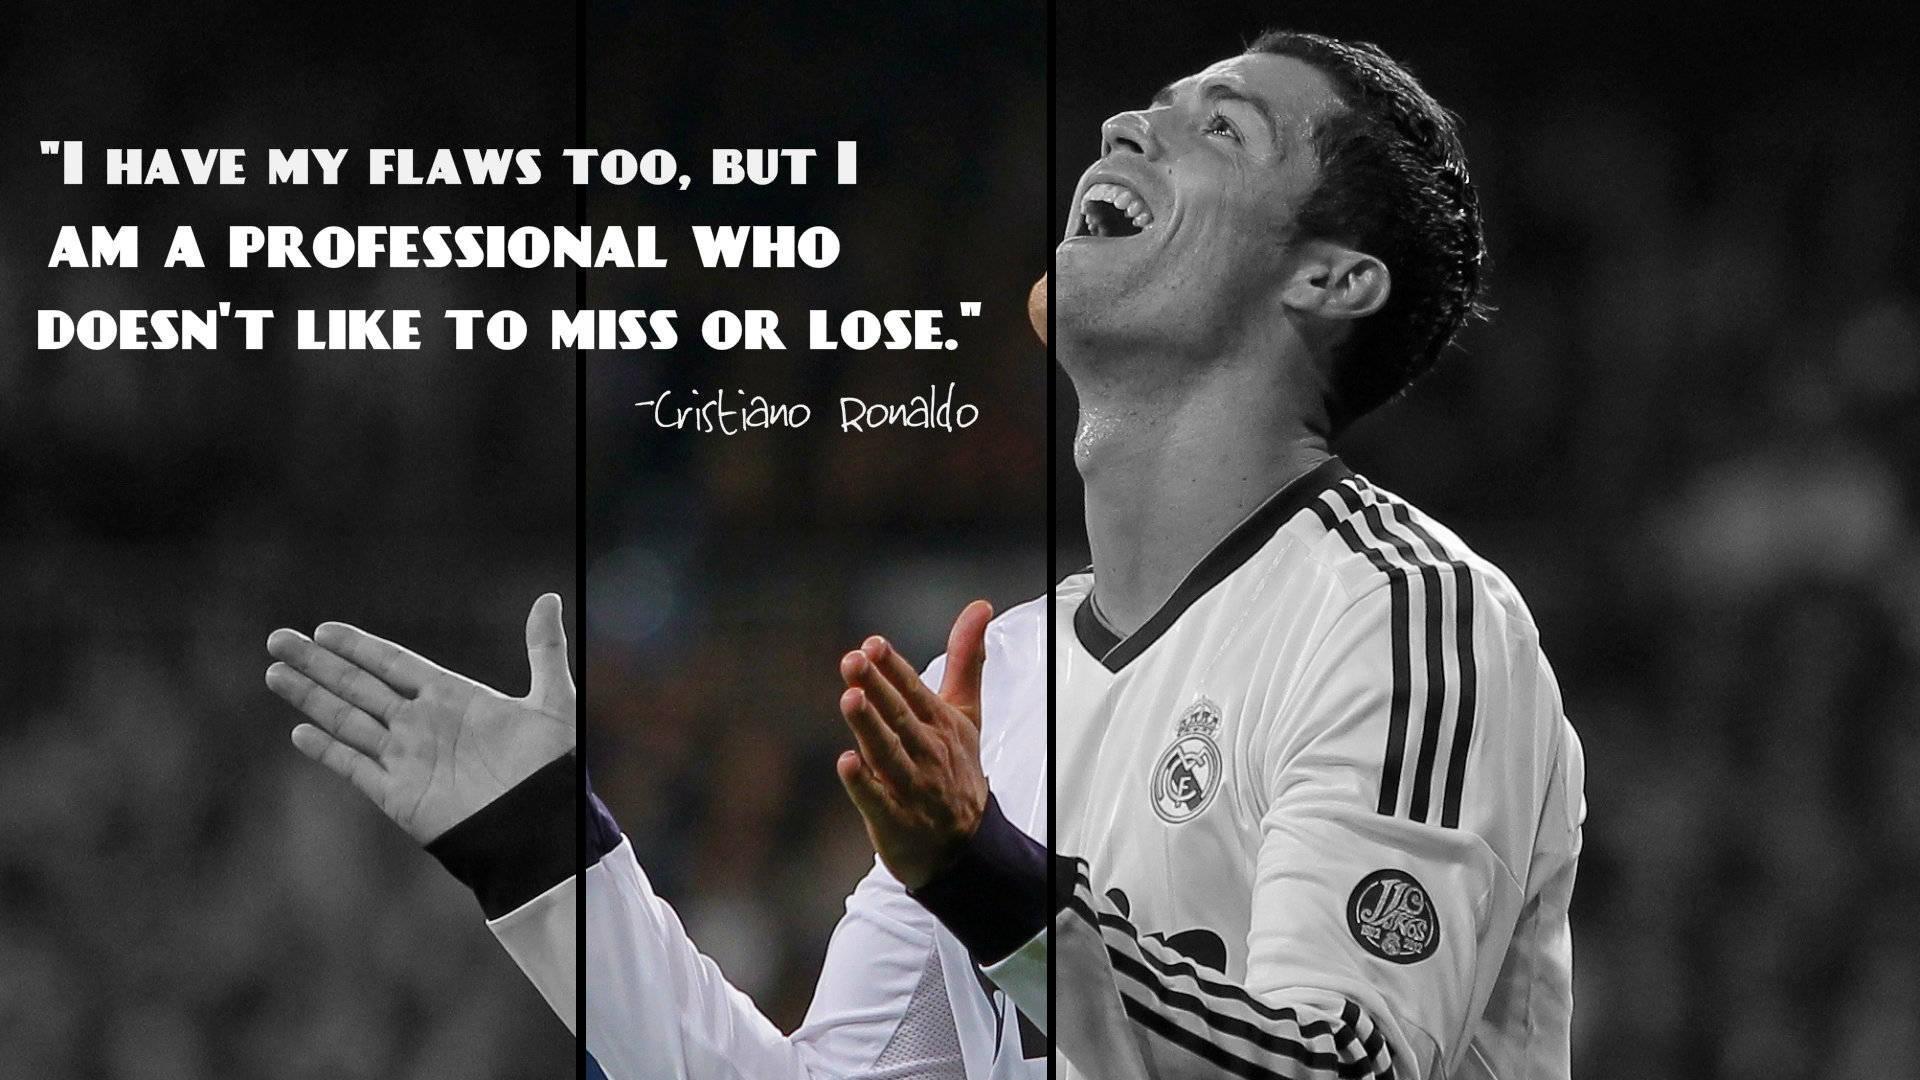 Cristiano Ronaldo Quotes Wallpapers - Top Free Cristiano Ronaldo Quotes